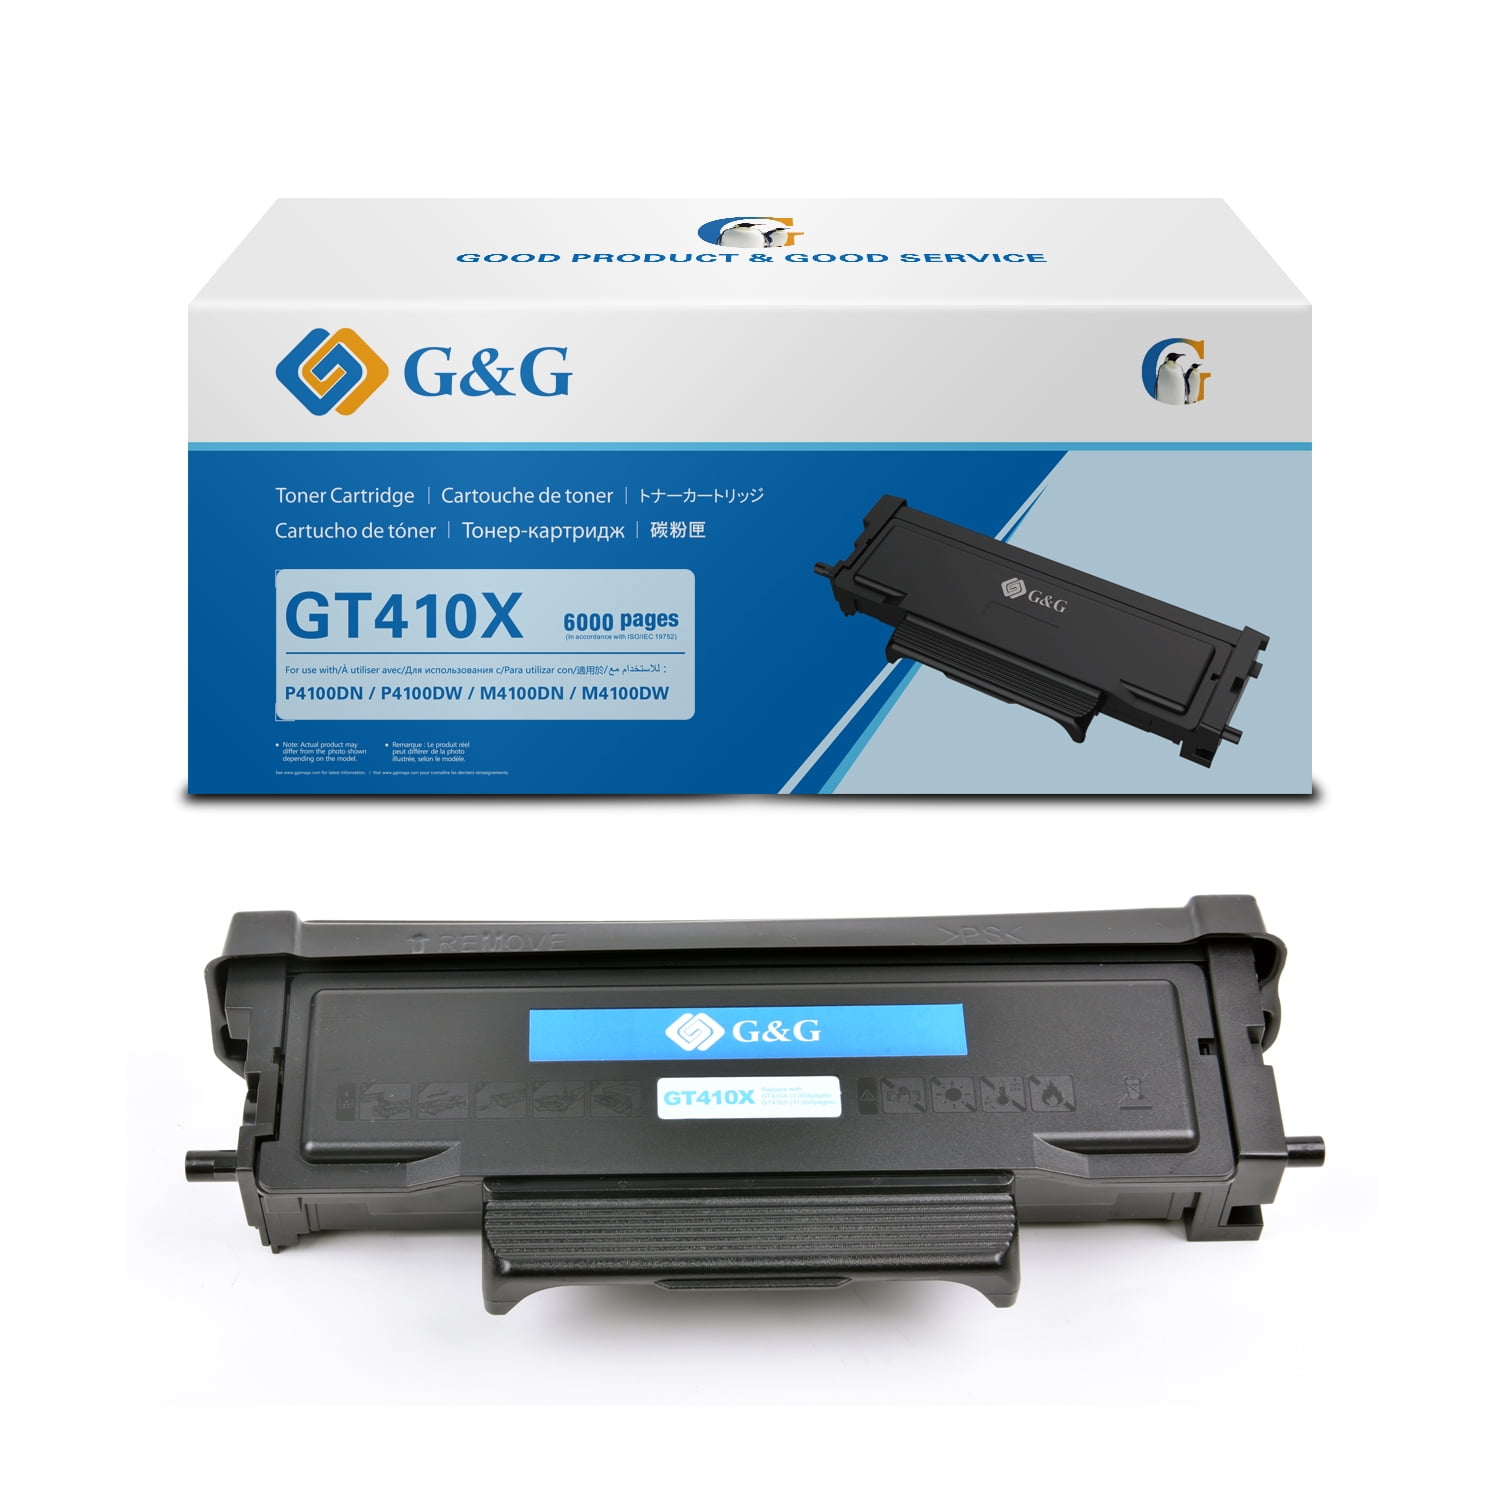 G&G GT410X HY Toner with 6,000 pages Black for G&G Printer P4100DW, - Walmart.com